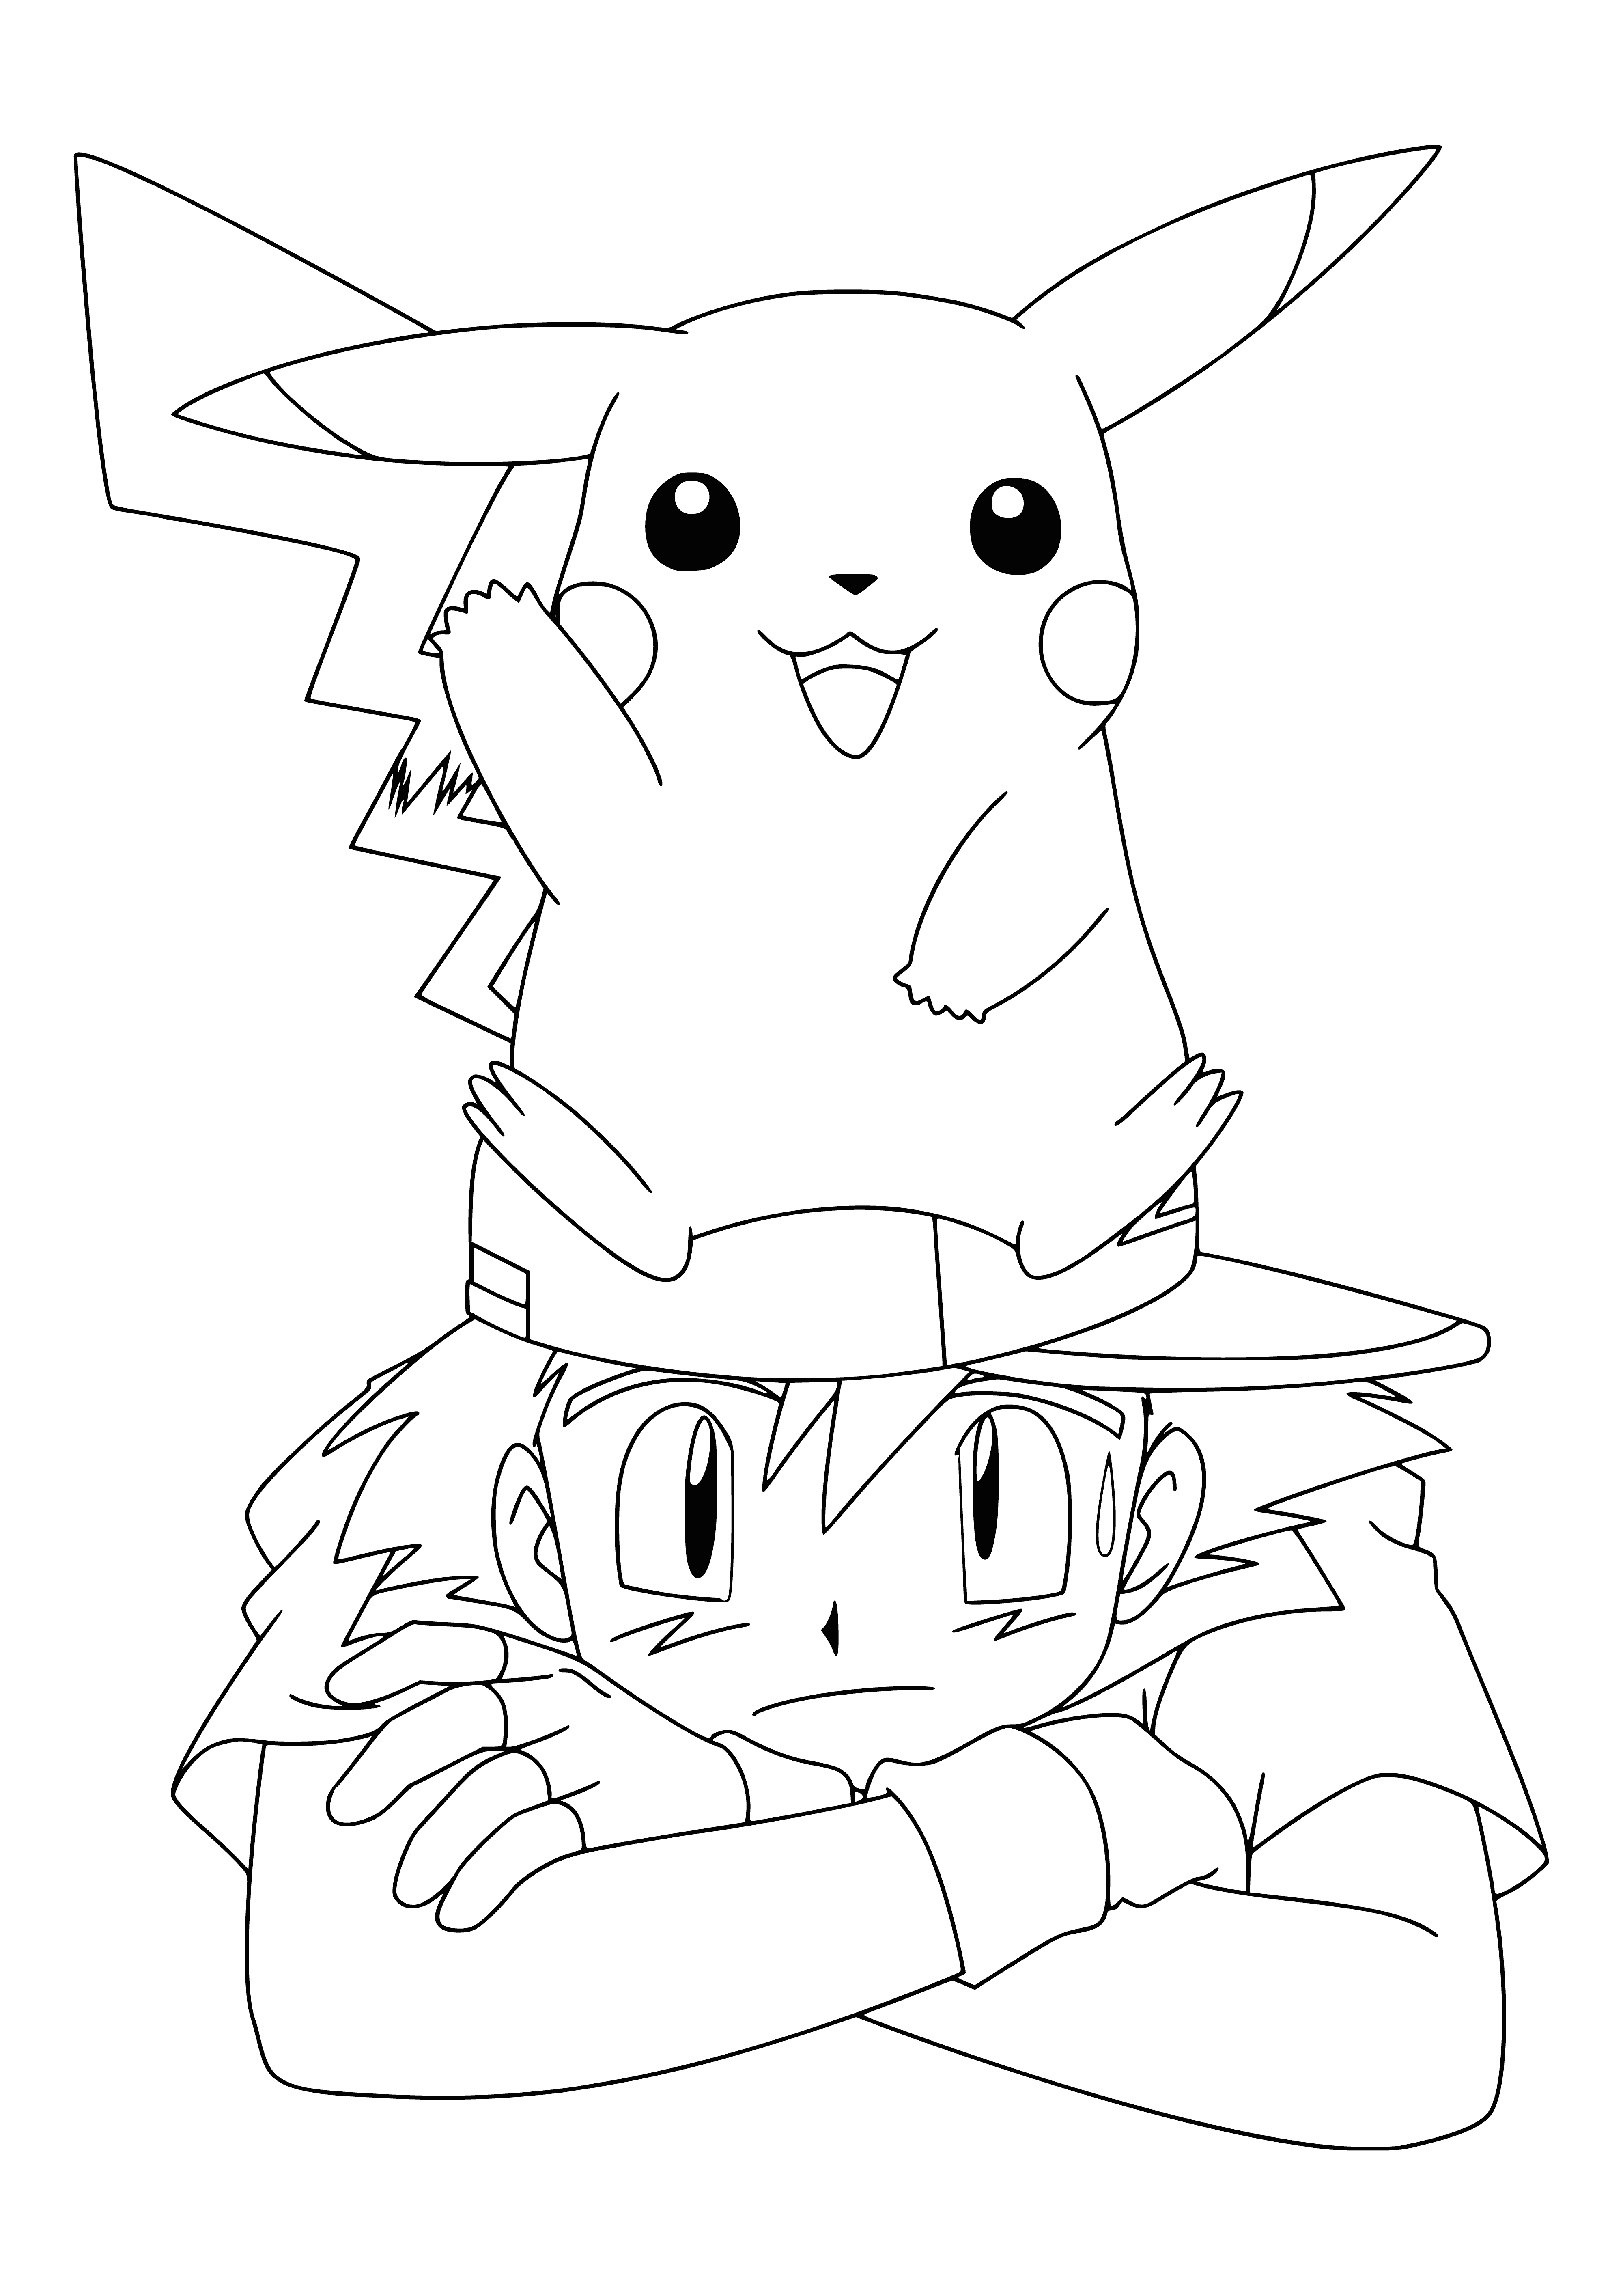 coloring page: Pikachu & Ash Ketchum featured in a coloring page. Pikachu is a small yellow creature, Ash is a boy wearing a blue shirt & red pants and holding a Poké Ball.